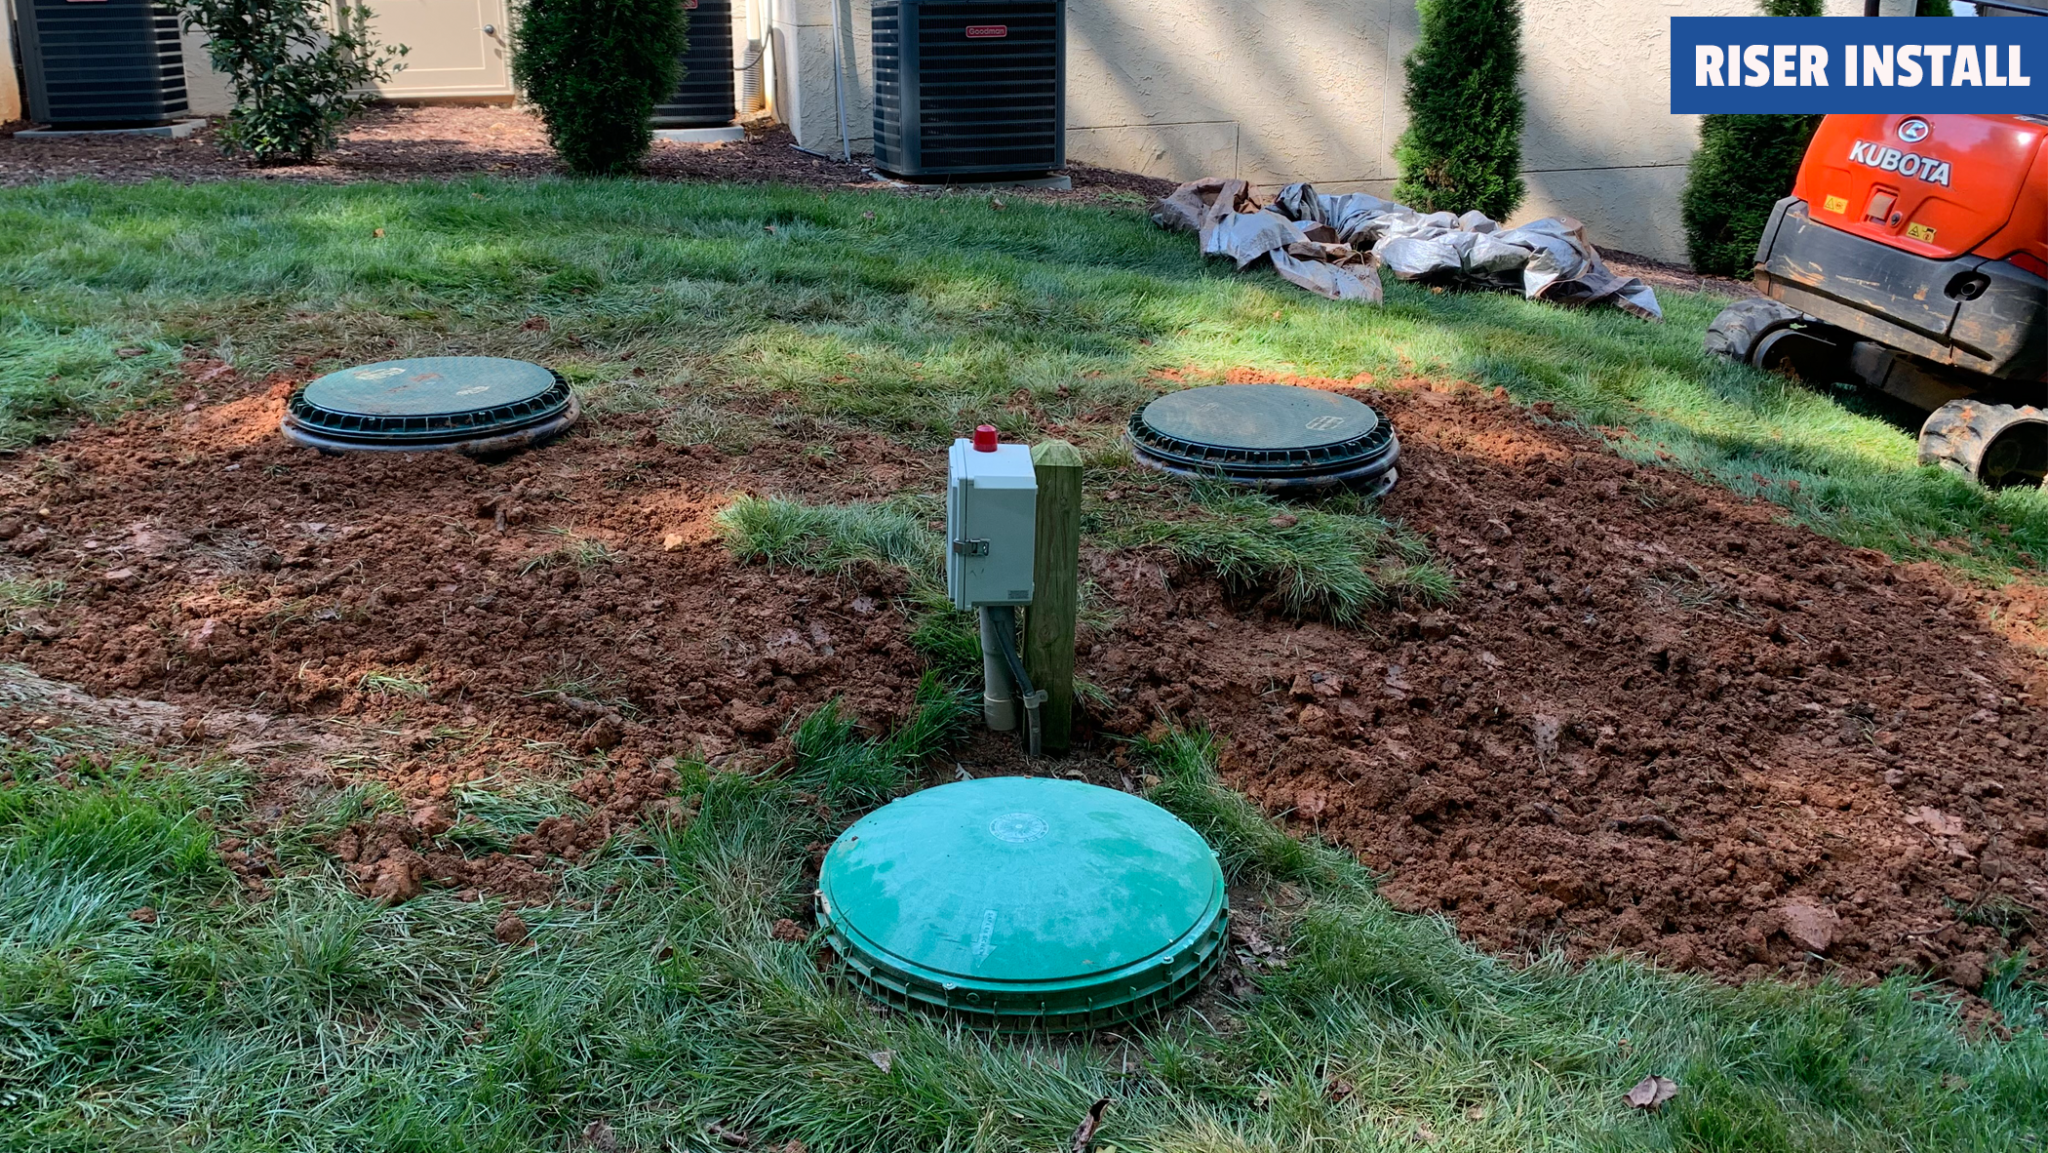 TW Ammons Septic - The final result of installing risers onto the inlet and outlet of the septic tank.